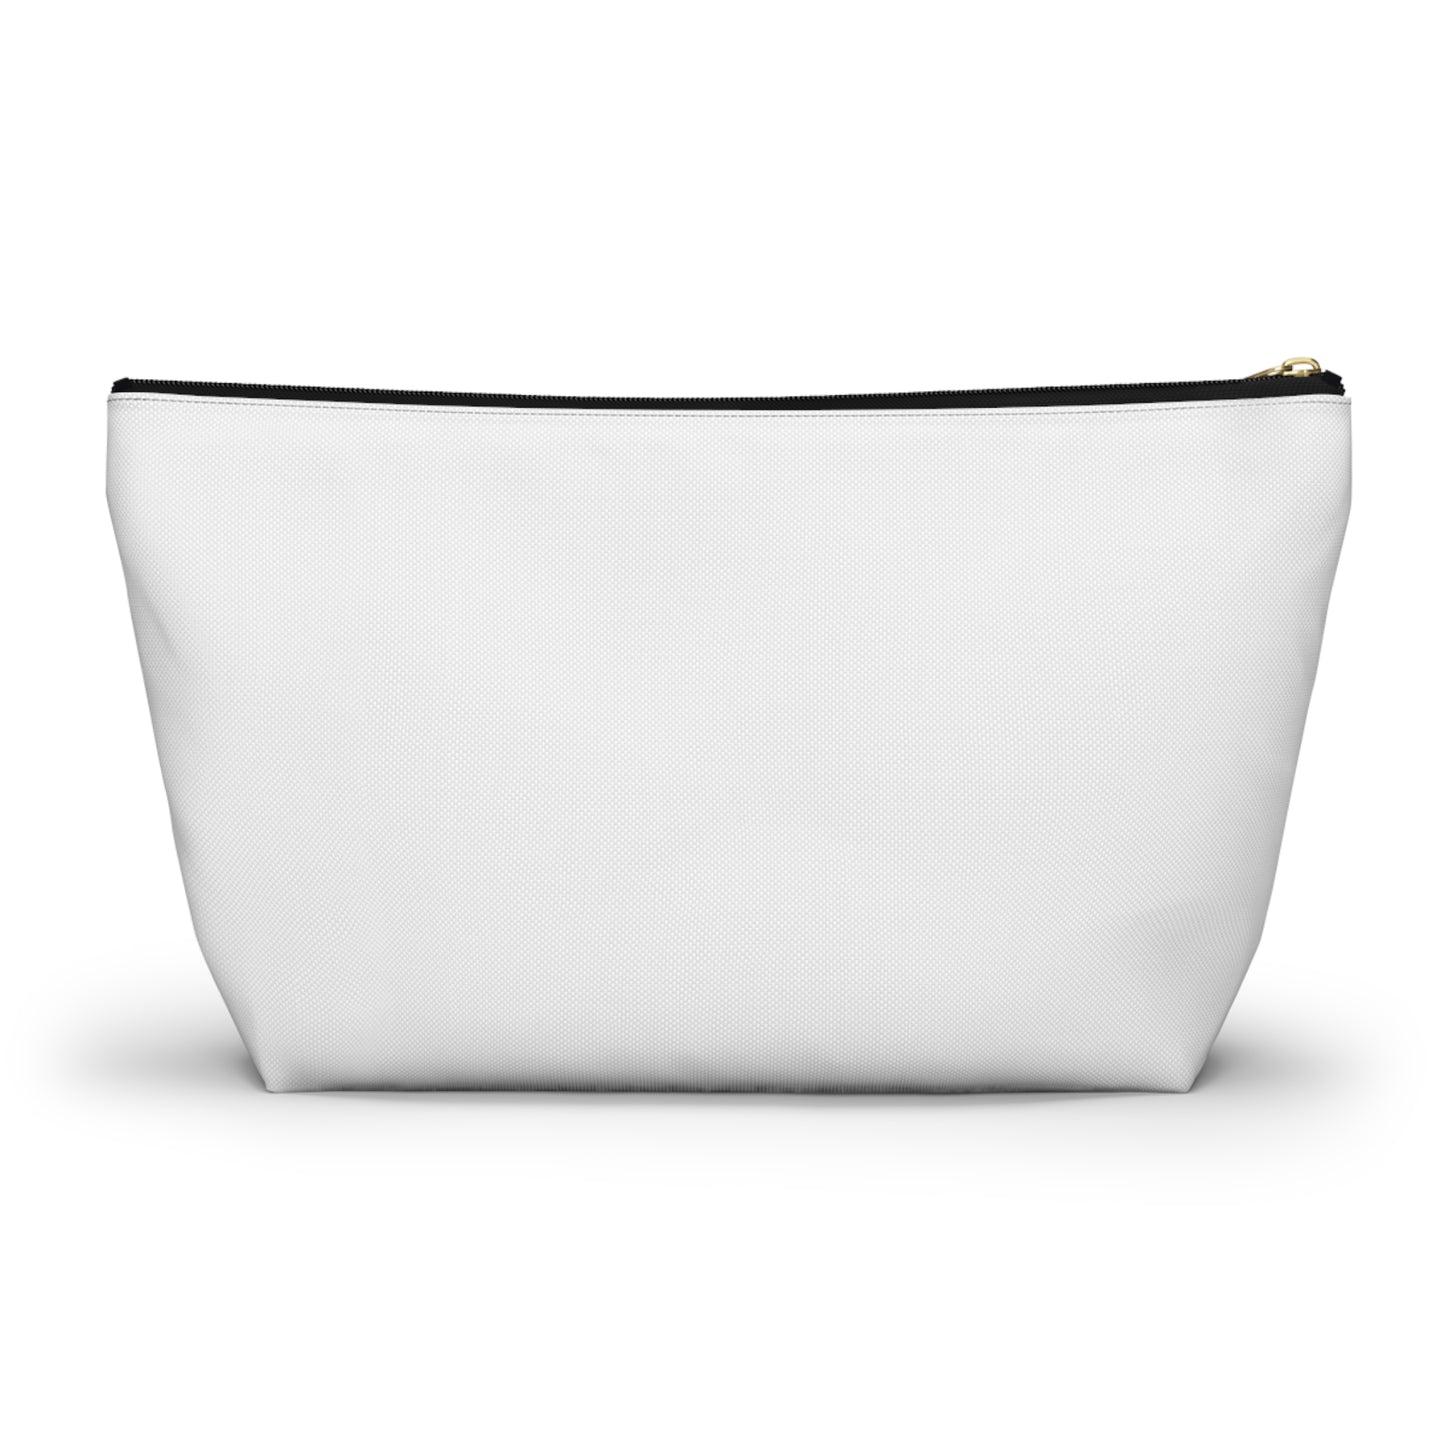 Cat Mom AF Accessory Pouch w T-bottom